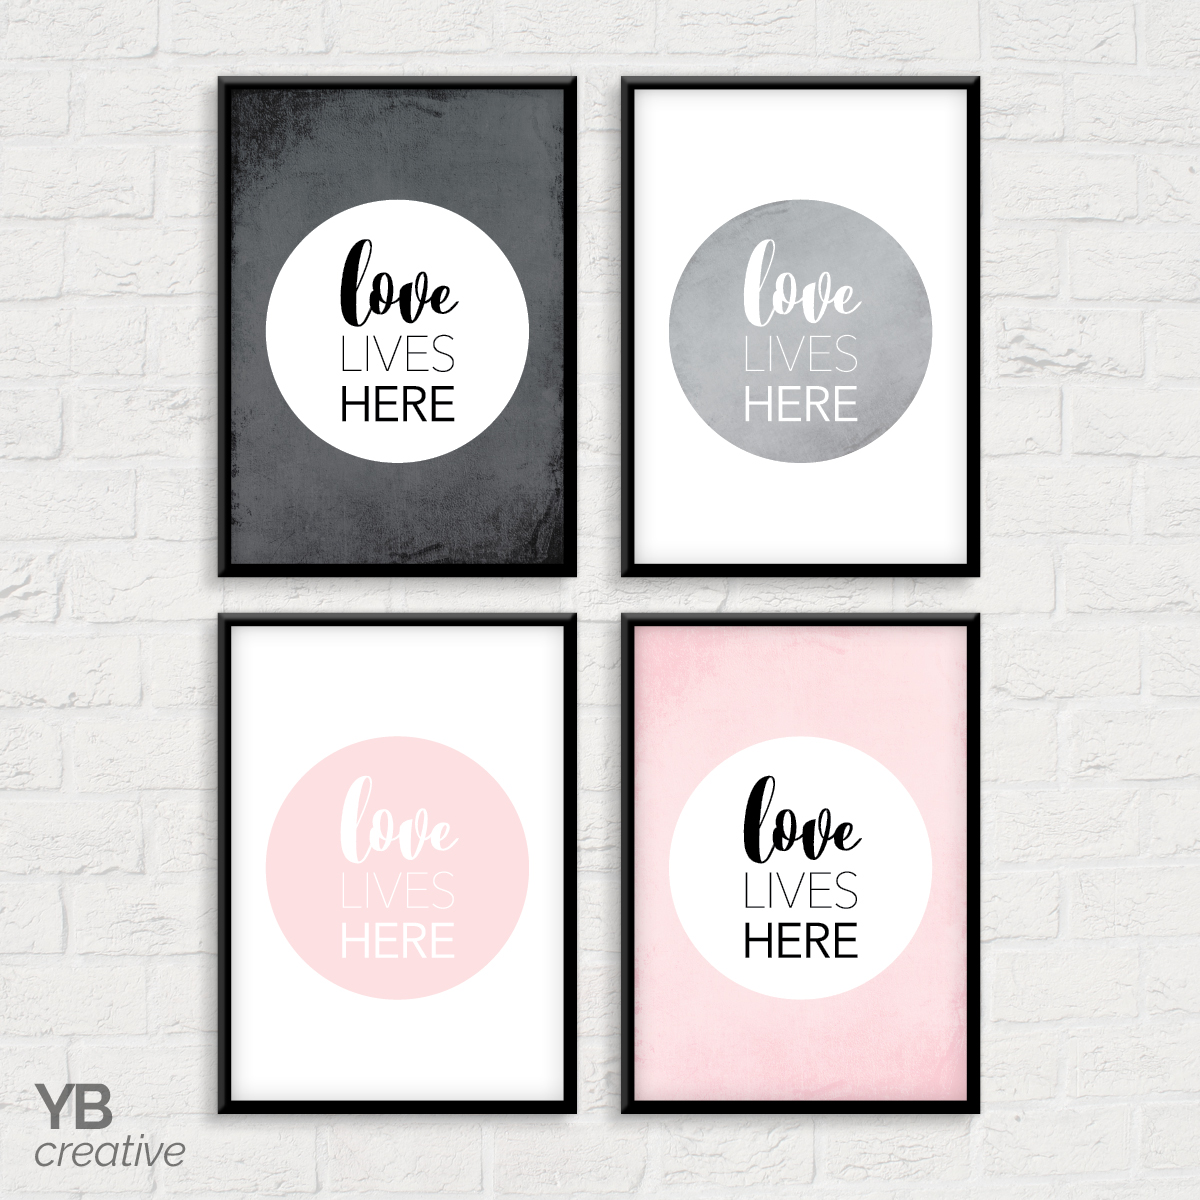 YBcreative Love lives here OPTIONS